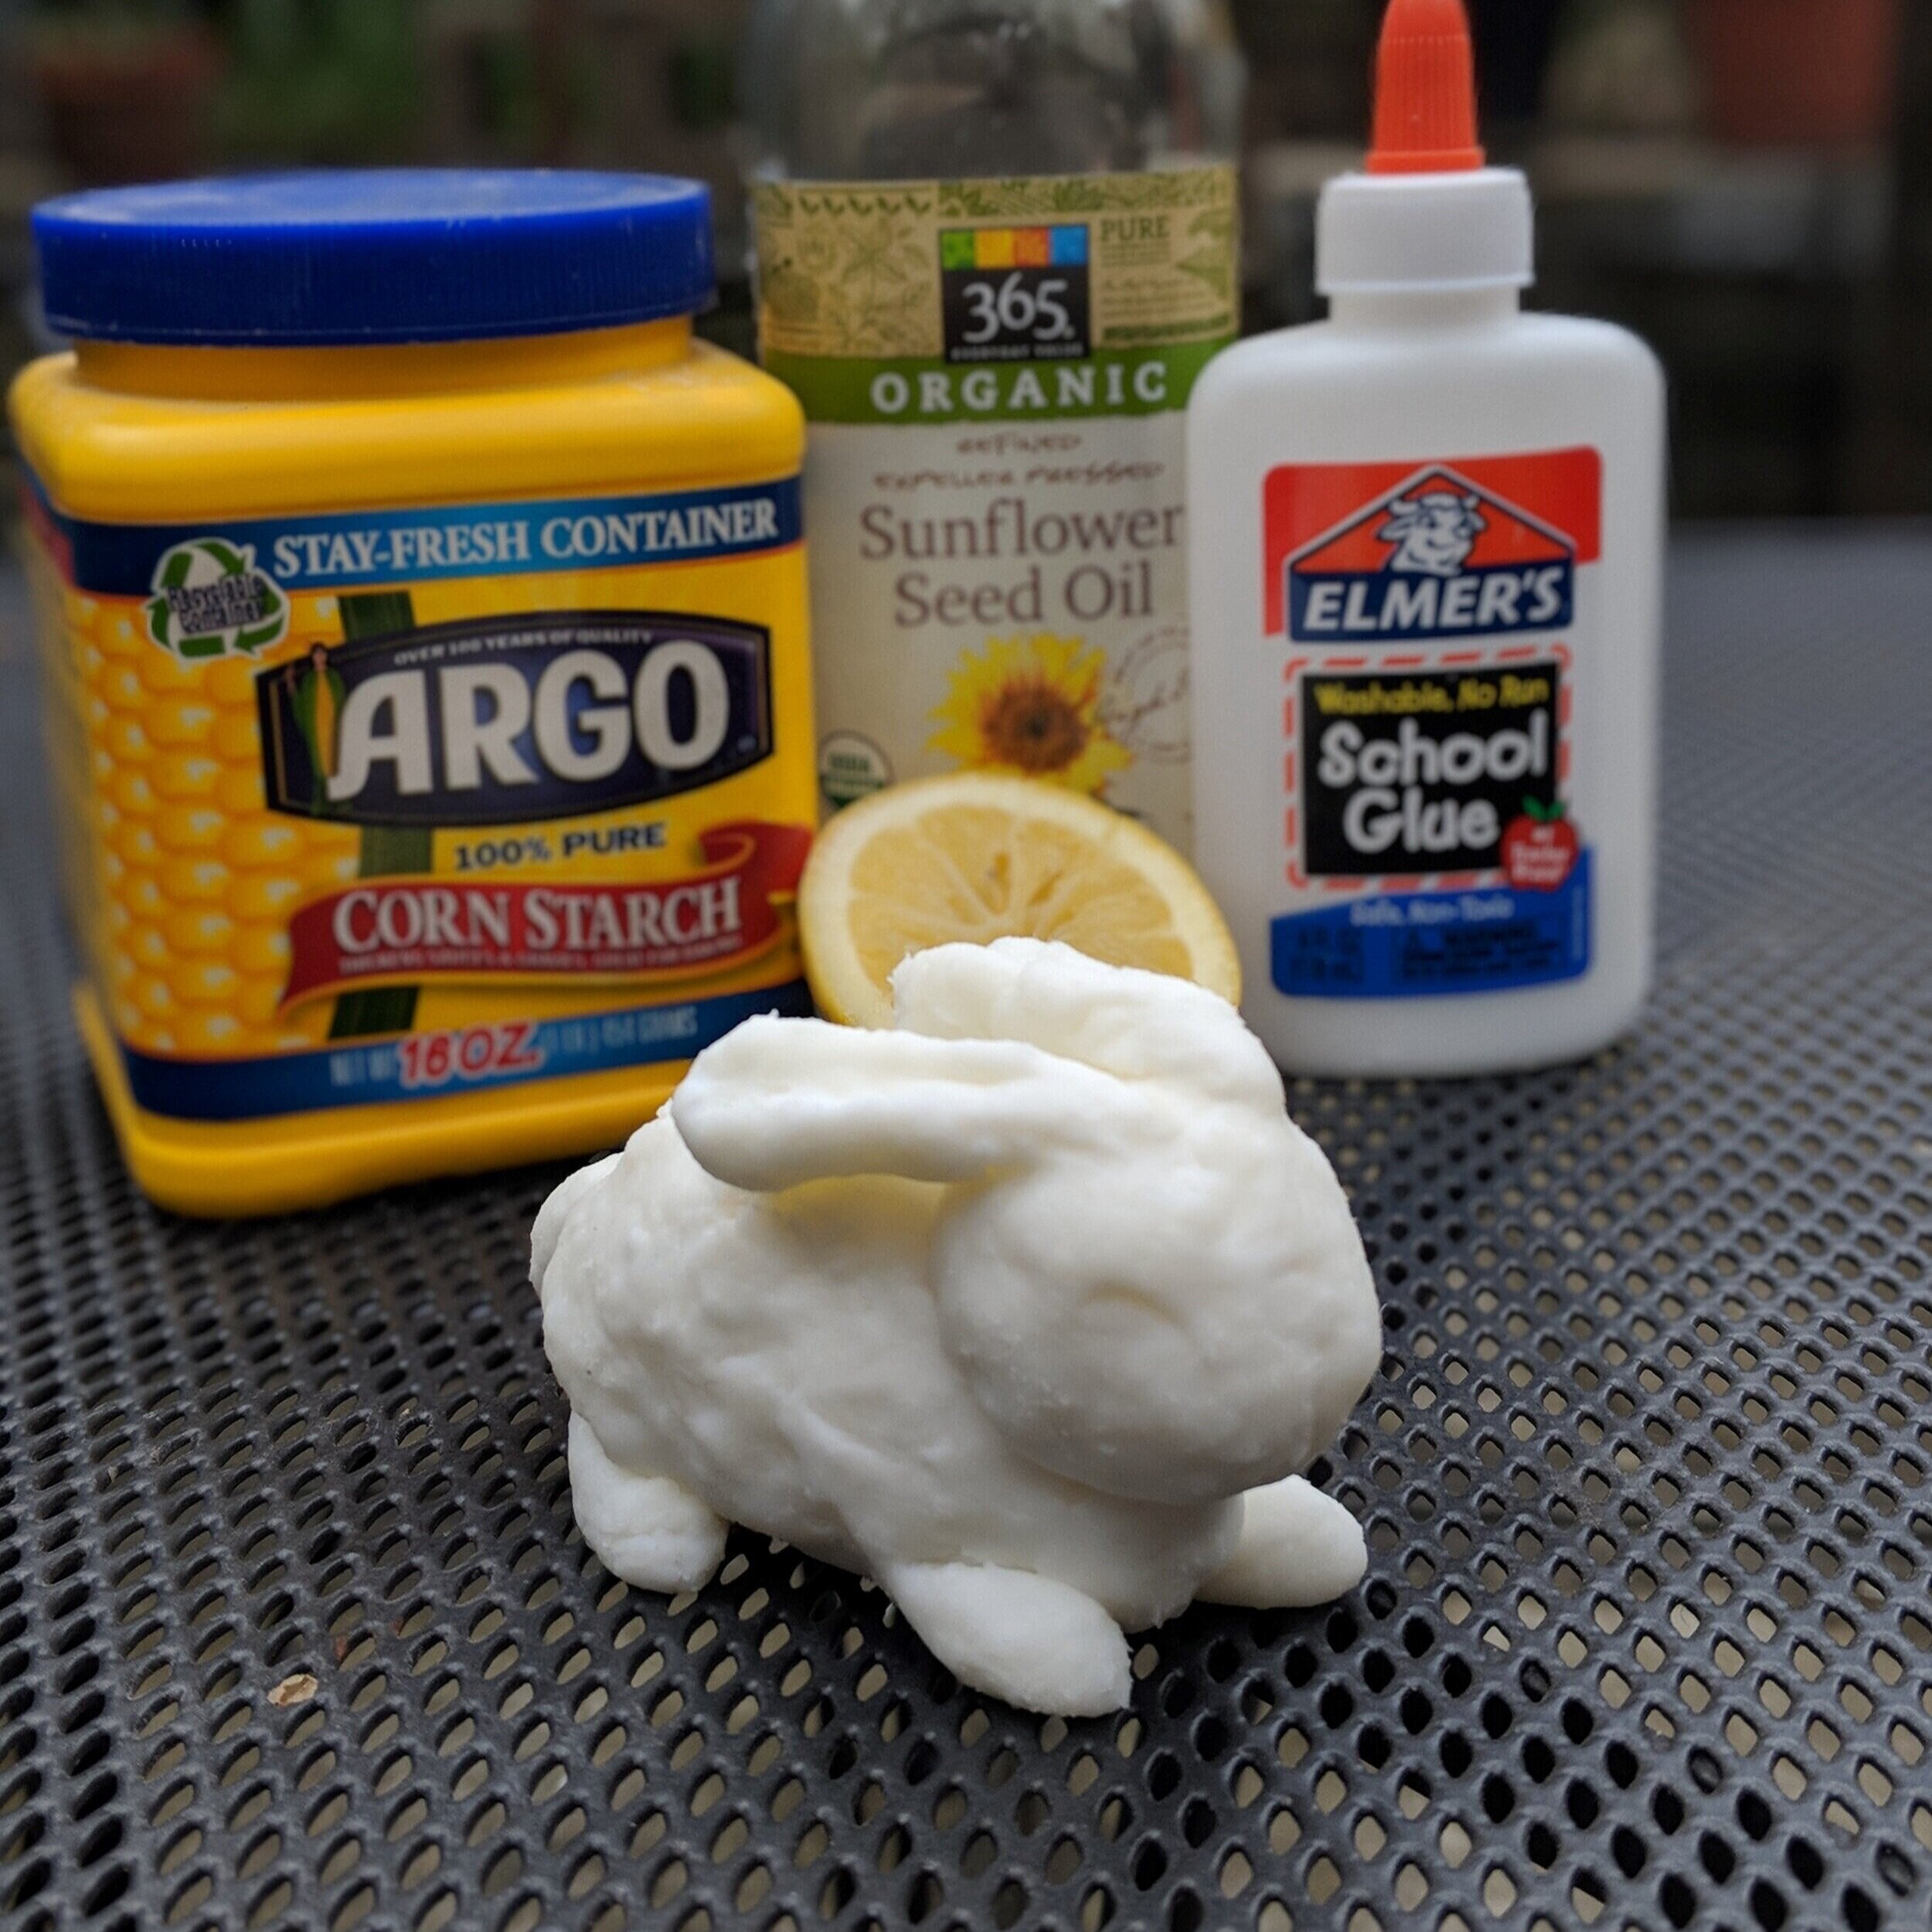 How to Make Clay  The BEST Air Dry Clay Recipe